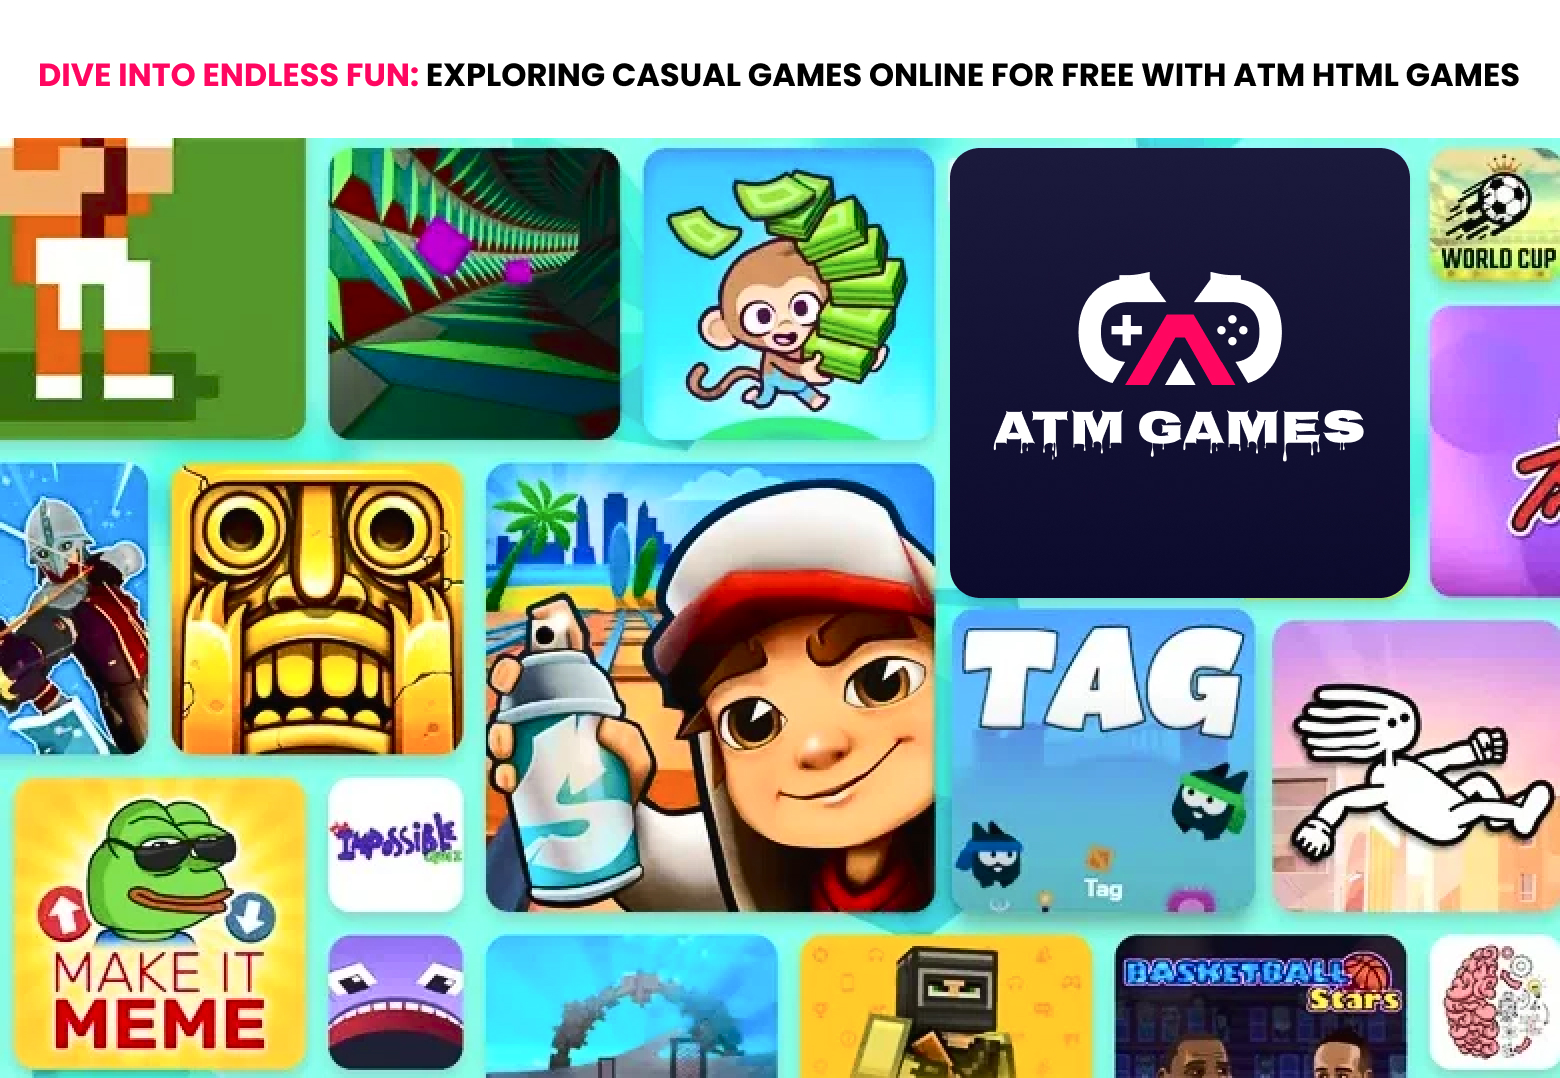 Dive into Endless Fun: Exploring Casual Games Online for Free with ATM HTML Games